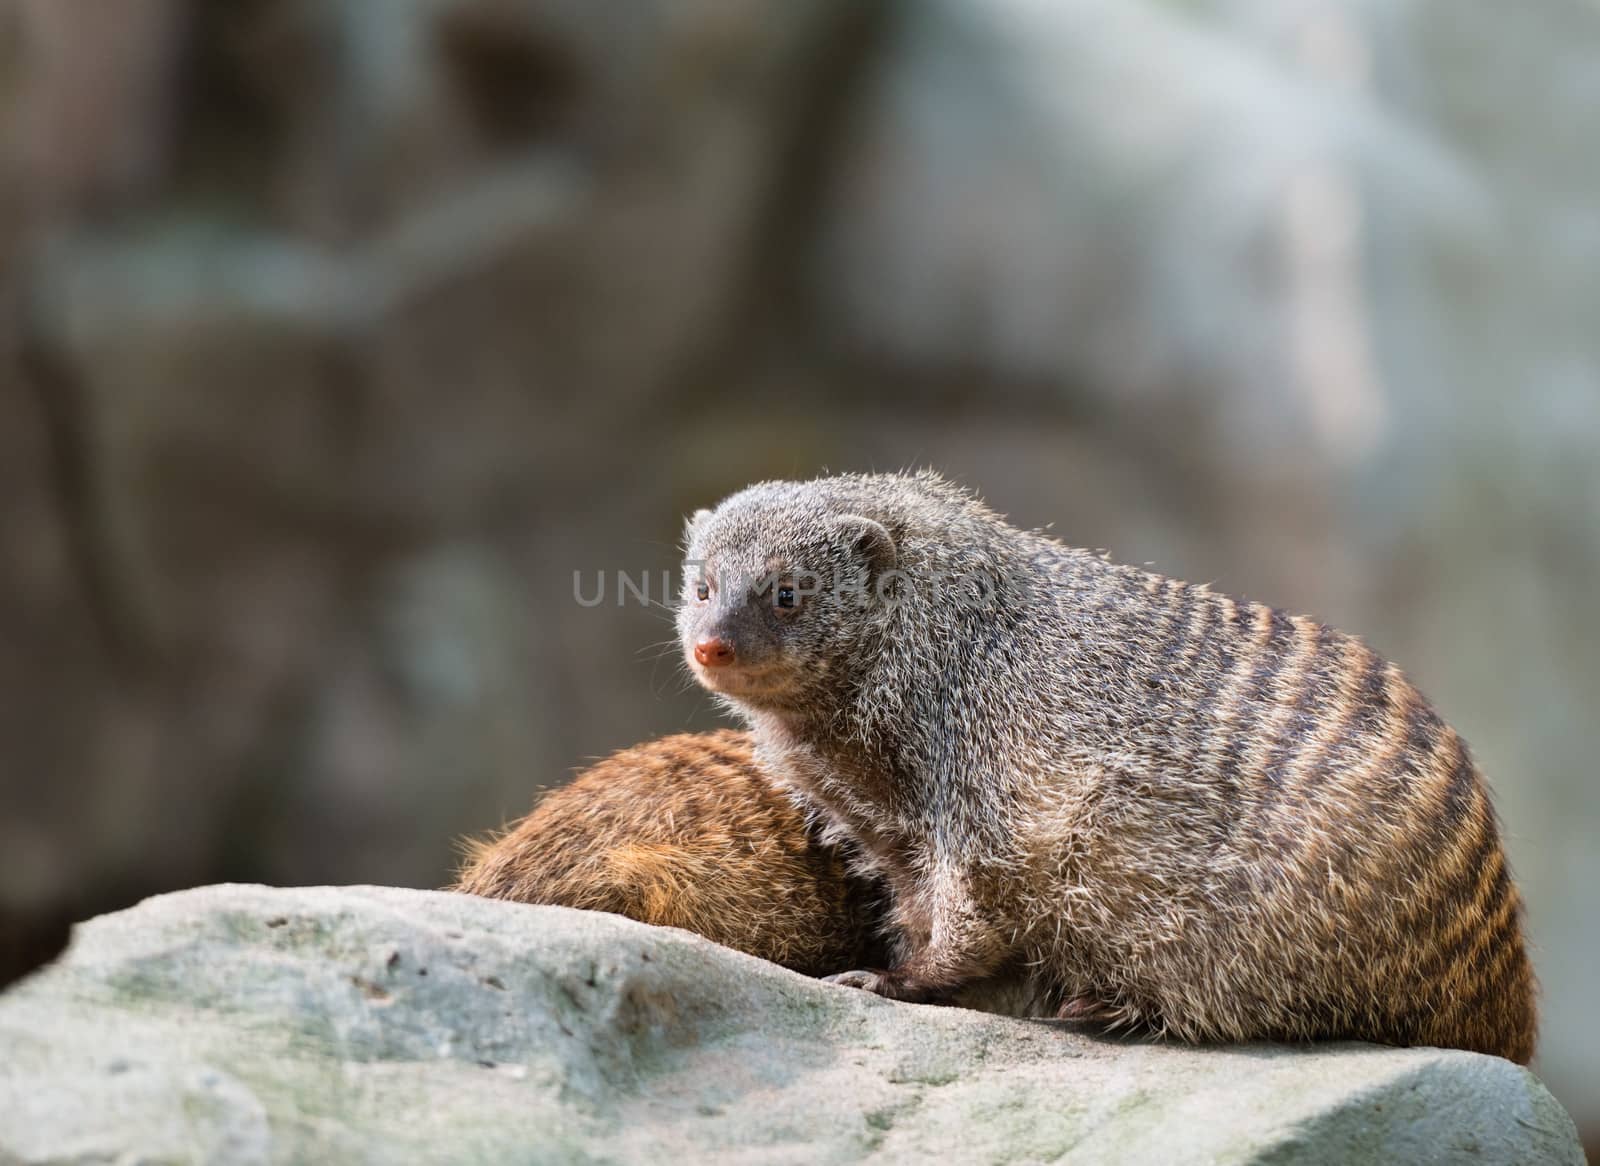 Two banded mongooses (Mungos mungo) on a stone